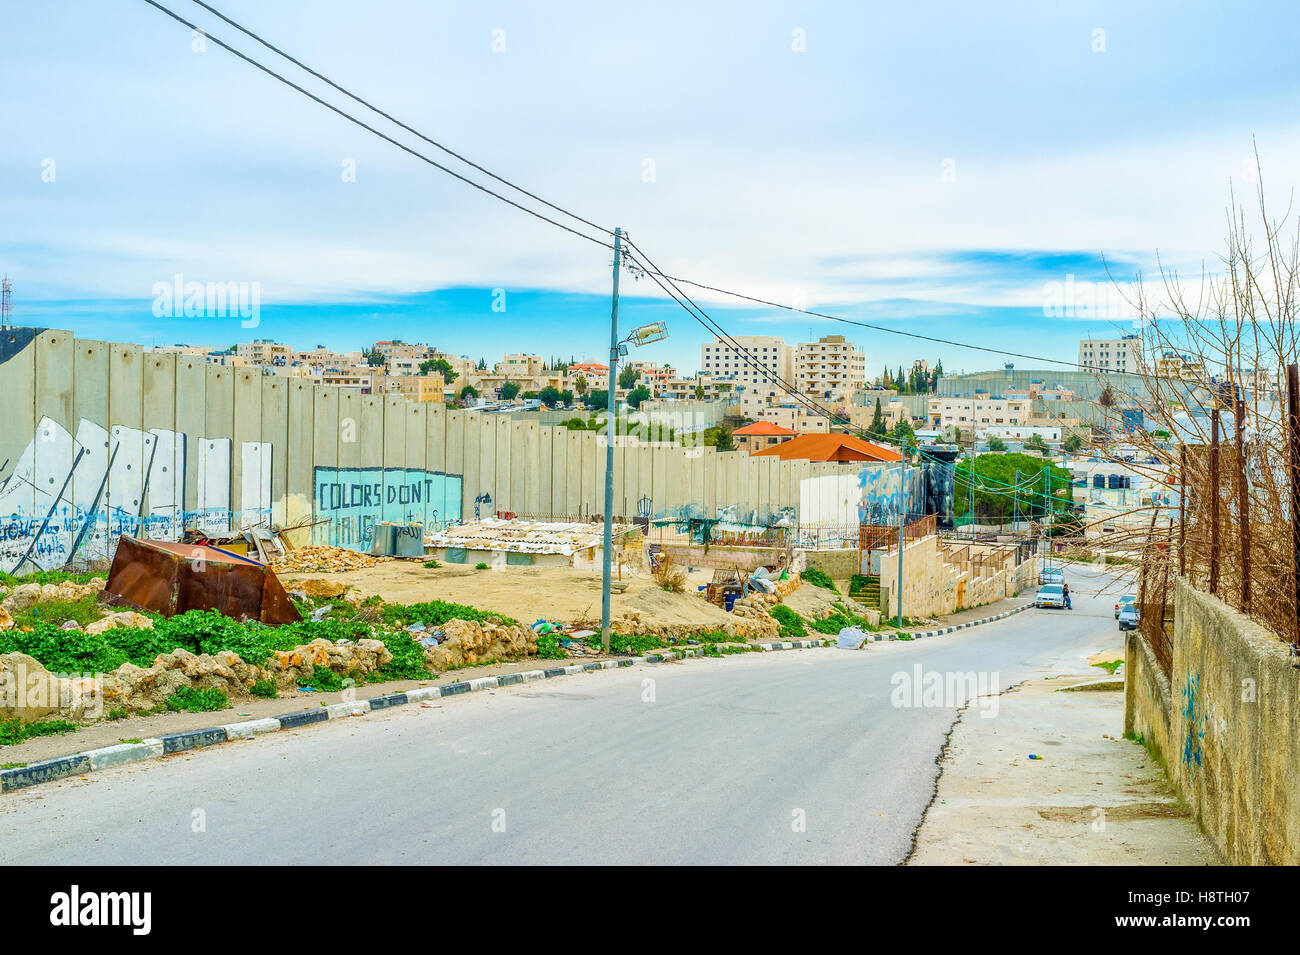 The separation wall along the street in Bethlehem Stock Photo